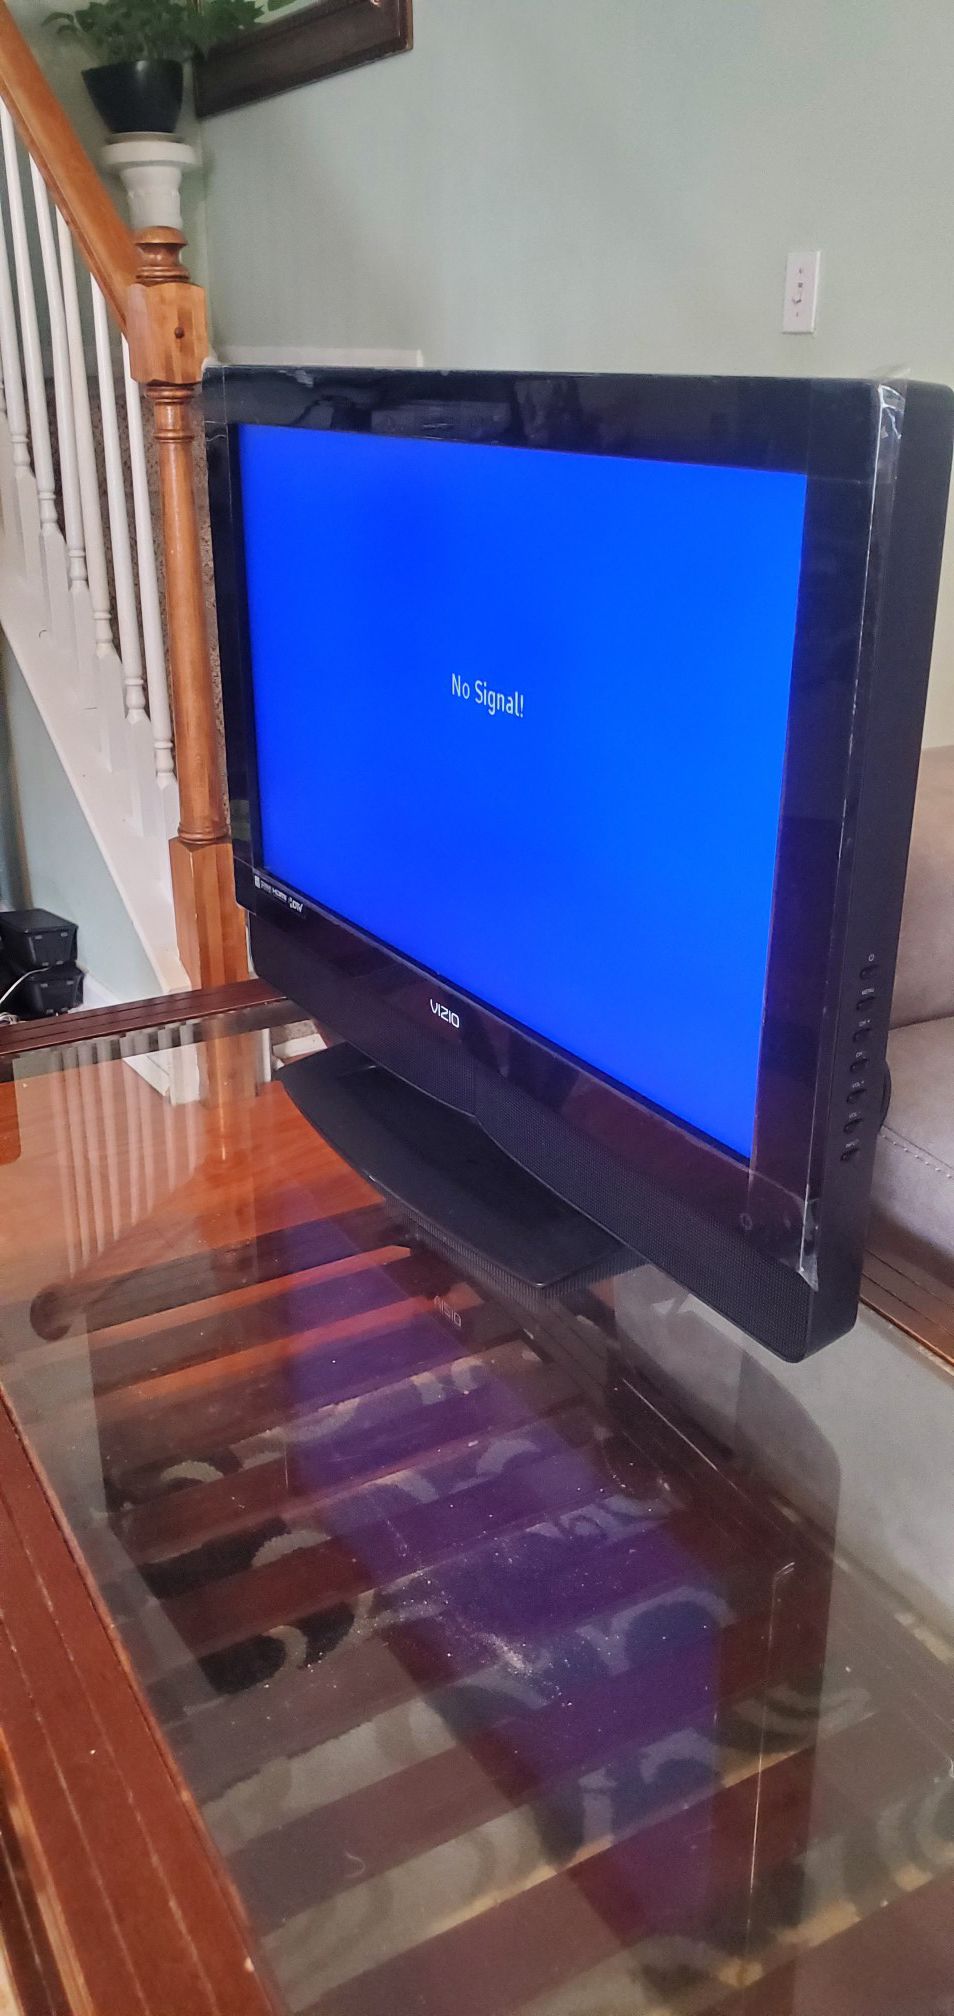 32" INCH LED 1080/P "VIZIO "FULL H/D FLAT SCREEN TV FOR SALE (can deliver)